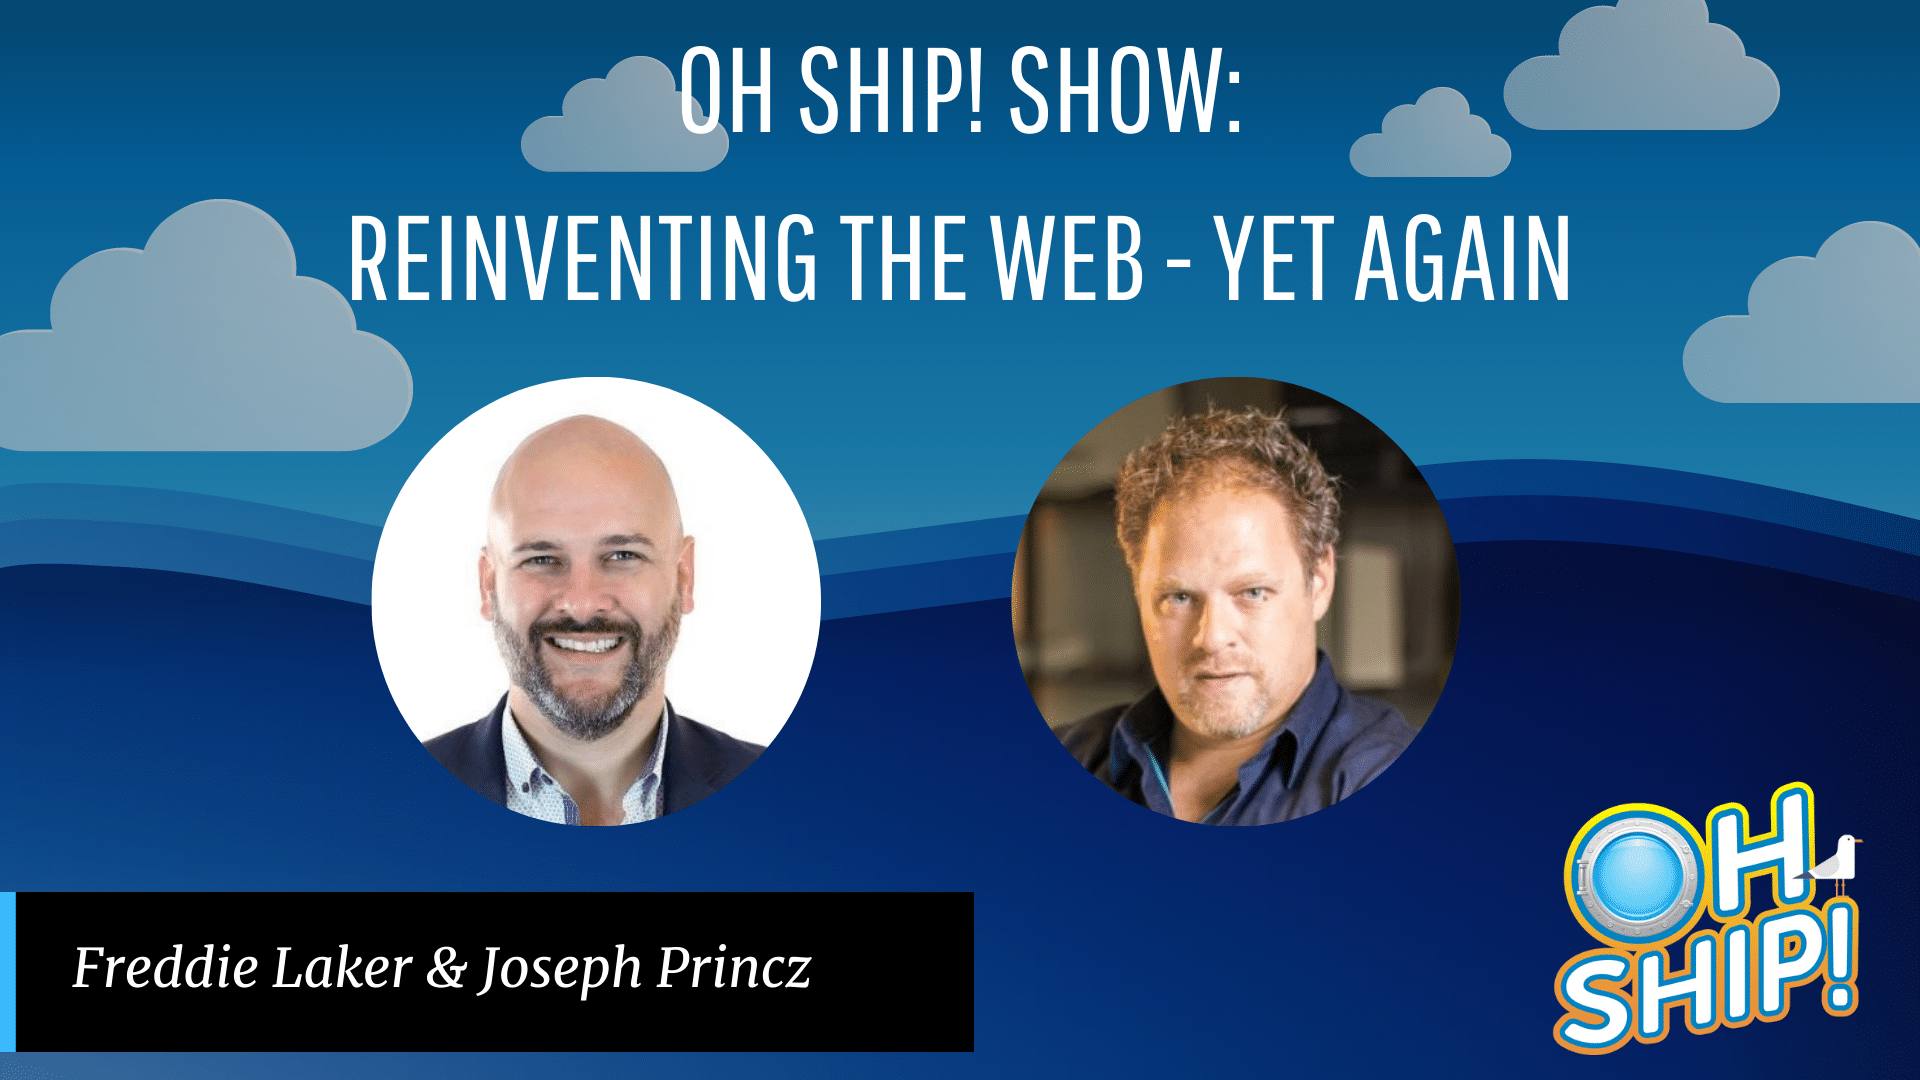 Promotional image for the "Oh Ship! Show" featuring the episode titled "Reinventing the Web - Yet Again." The image includes photos of two hosts, with one labeled Freddie Laker and the other Joseph Princz, Wrecking Ball CEO, against a blue background with clouds and the show’s logo.